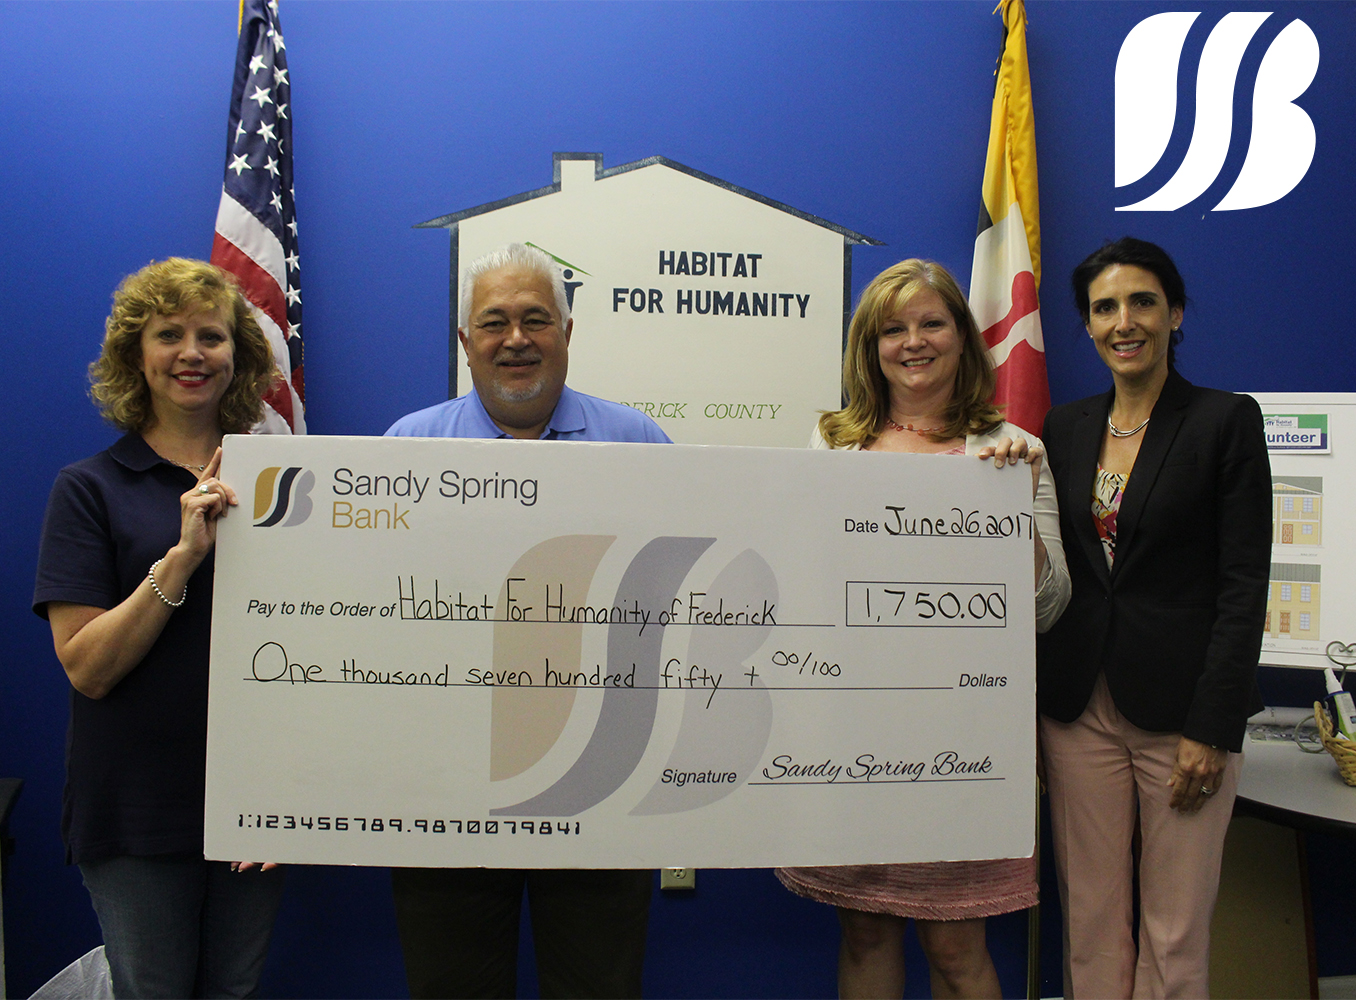 Sandy Spring Bank Presents $1,750 to Habitat For Humanity of Frederick